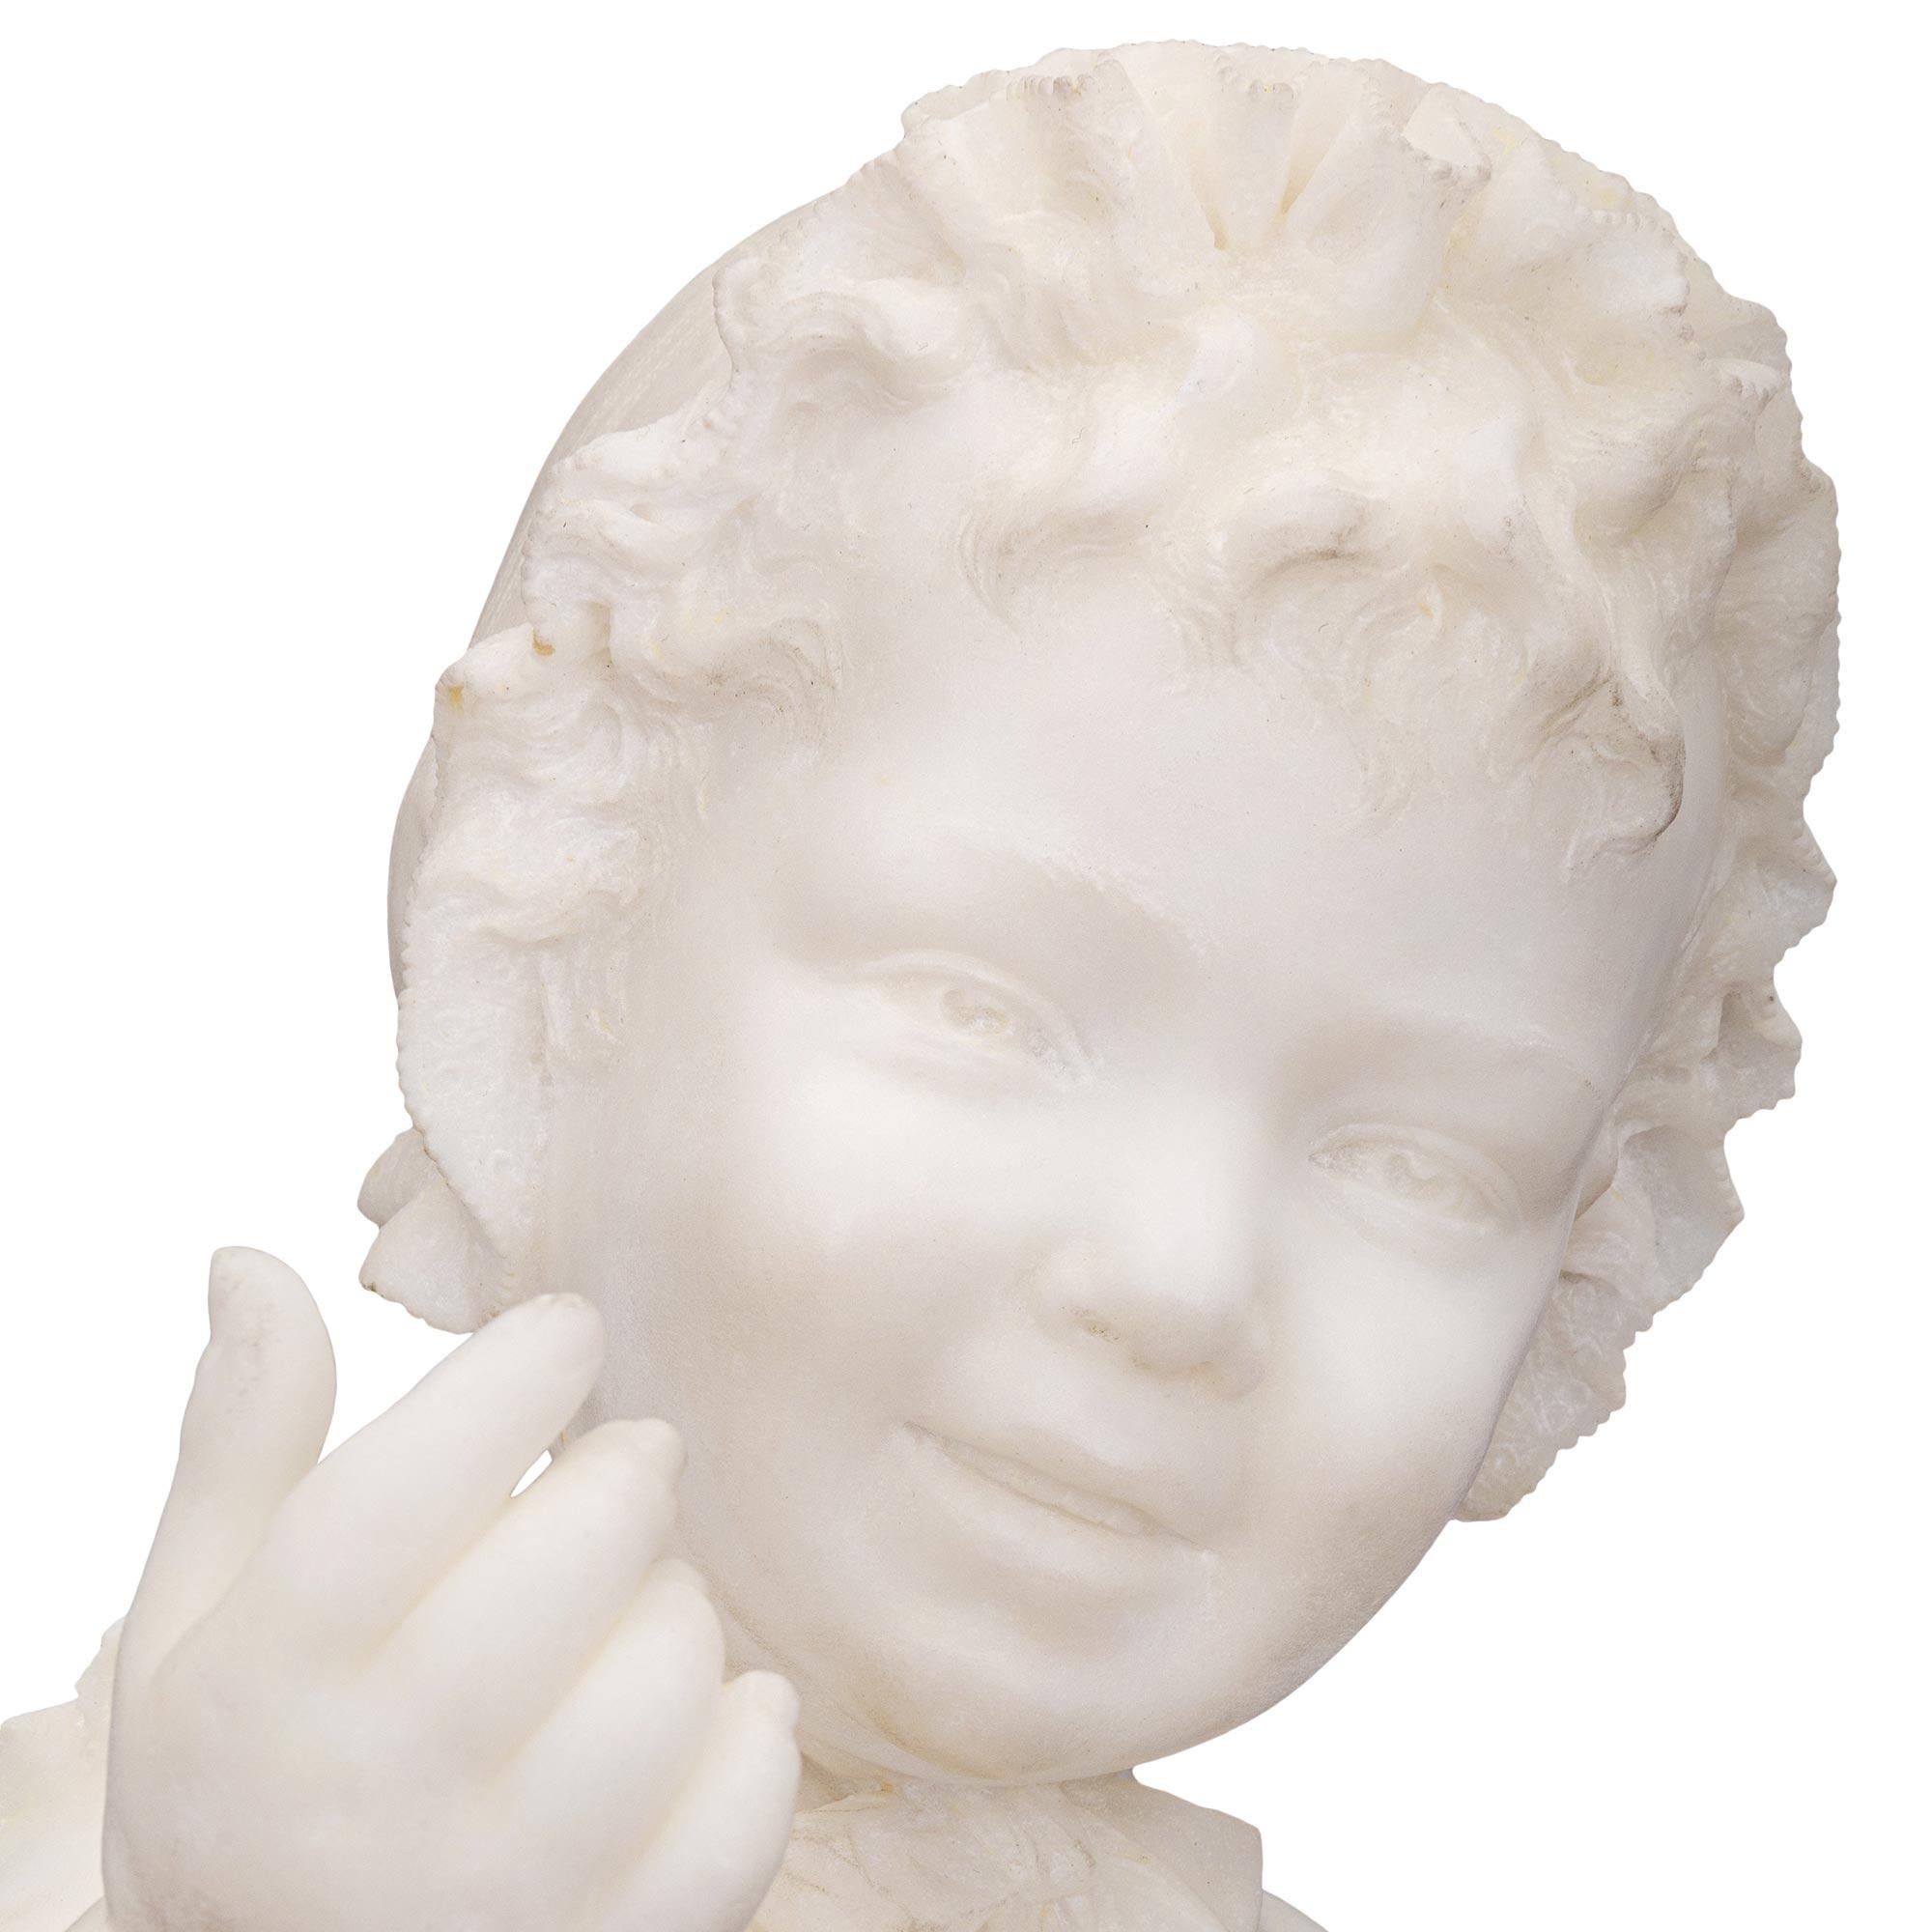 Italian 19th Century White Carrara Marble Statue of a Young Girl For Sale 2